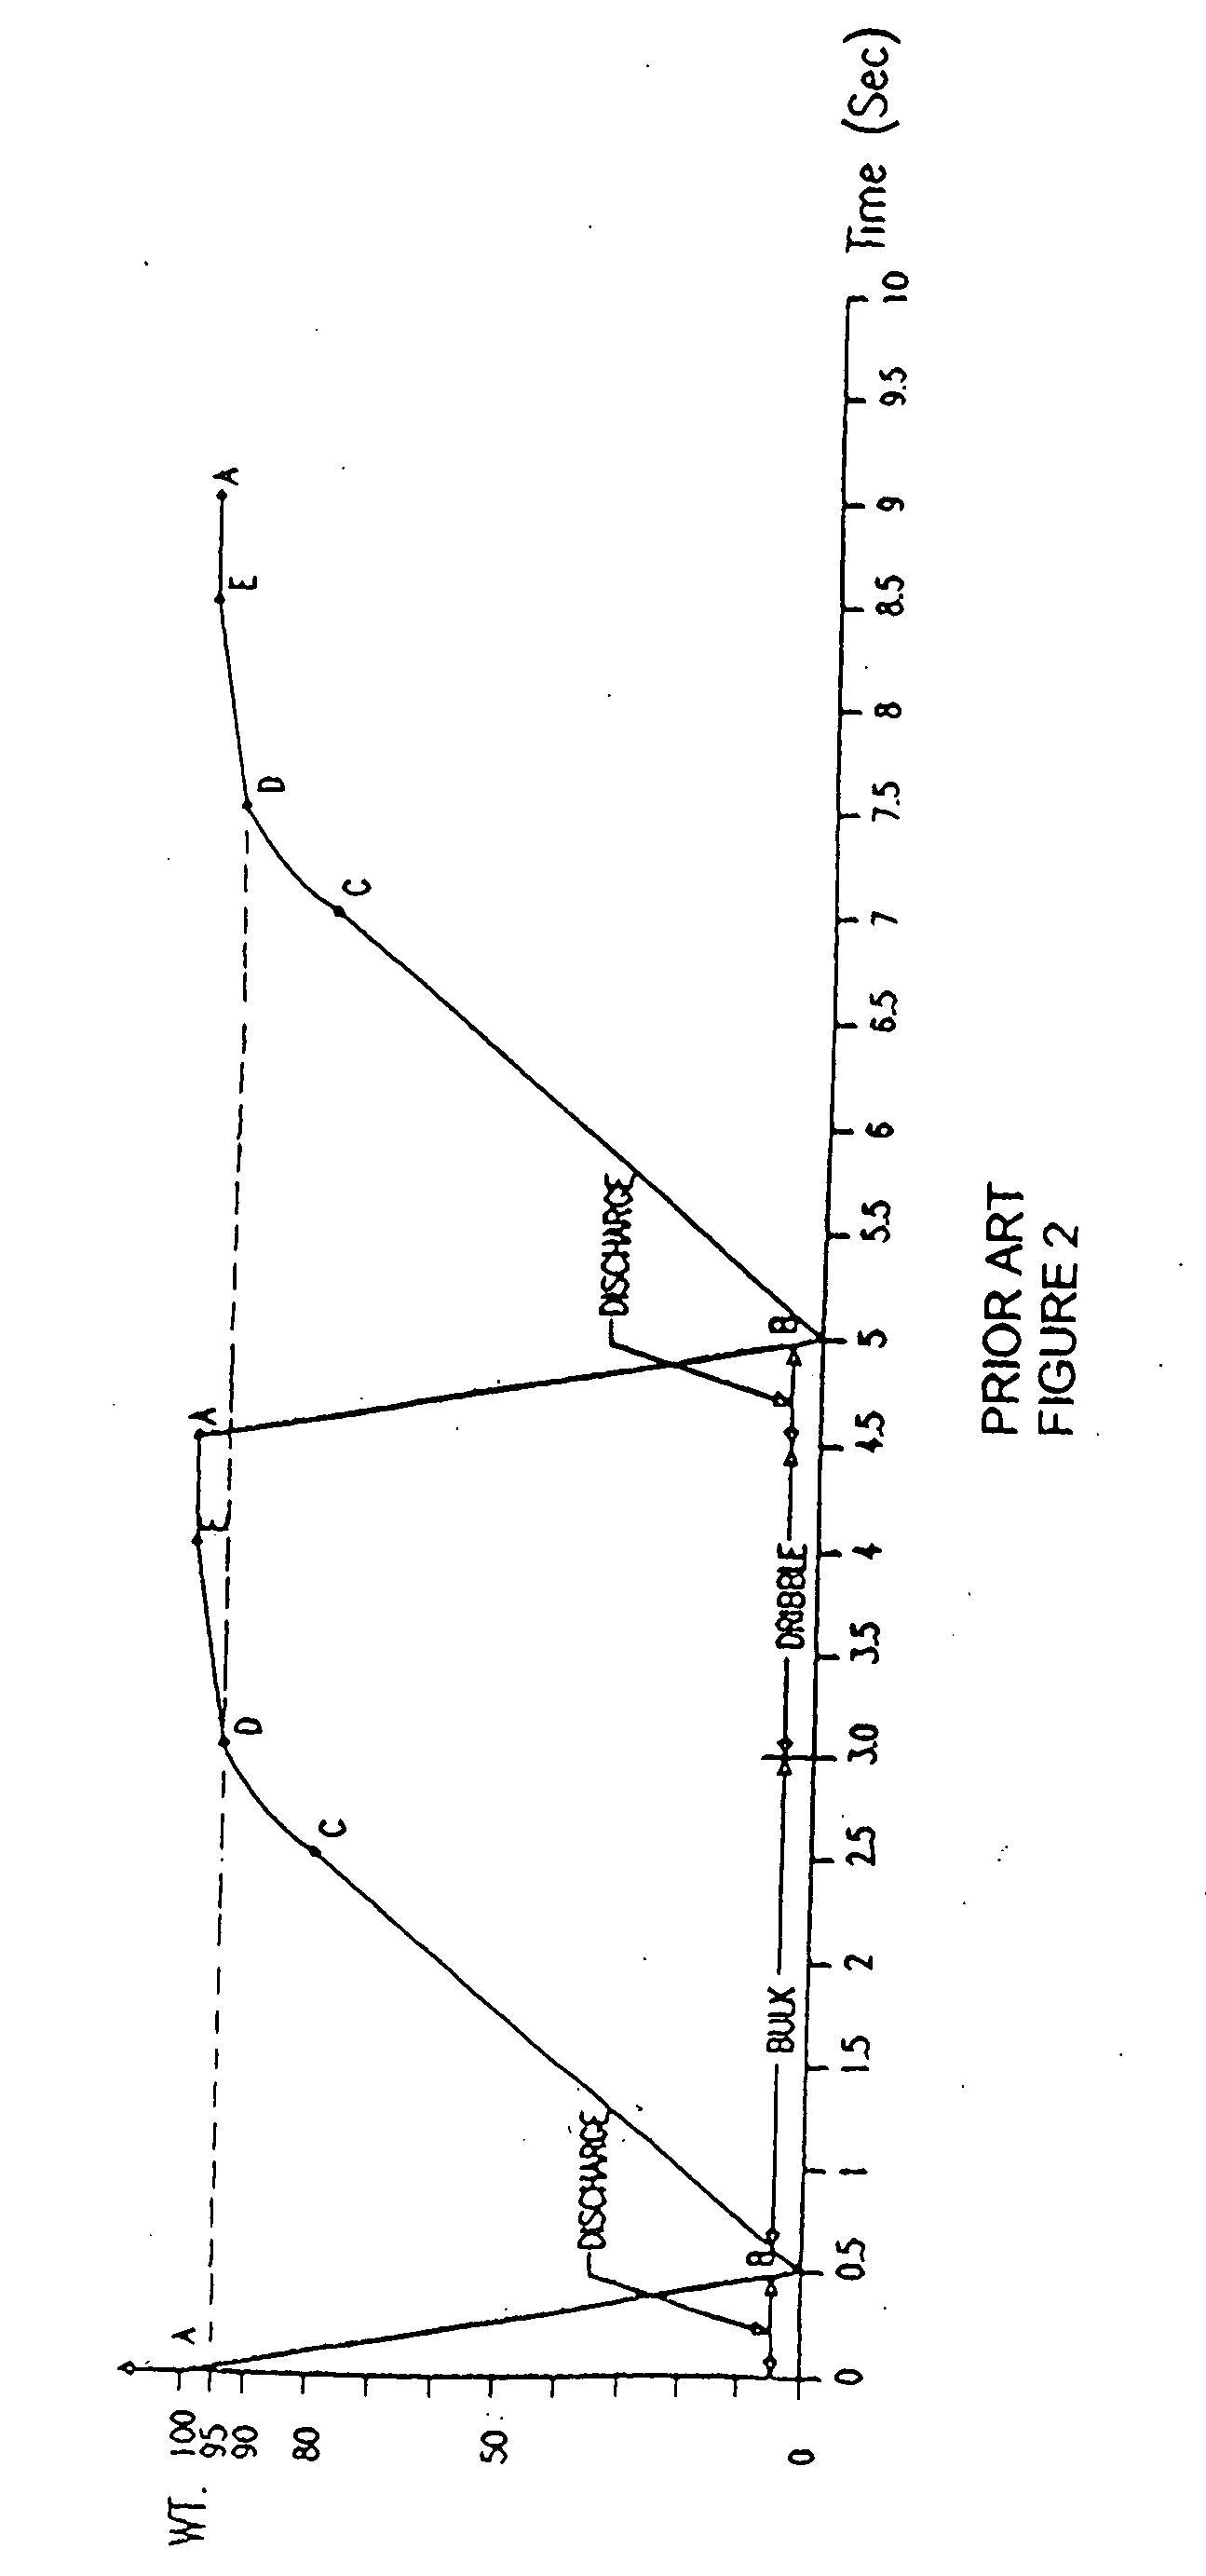 Method and apparatus for weighing fragile items